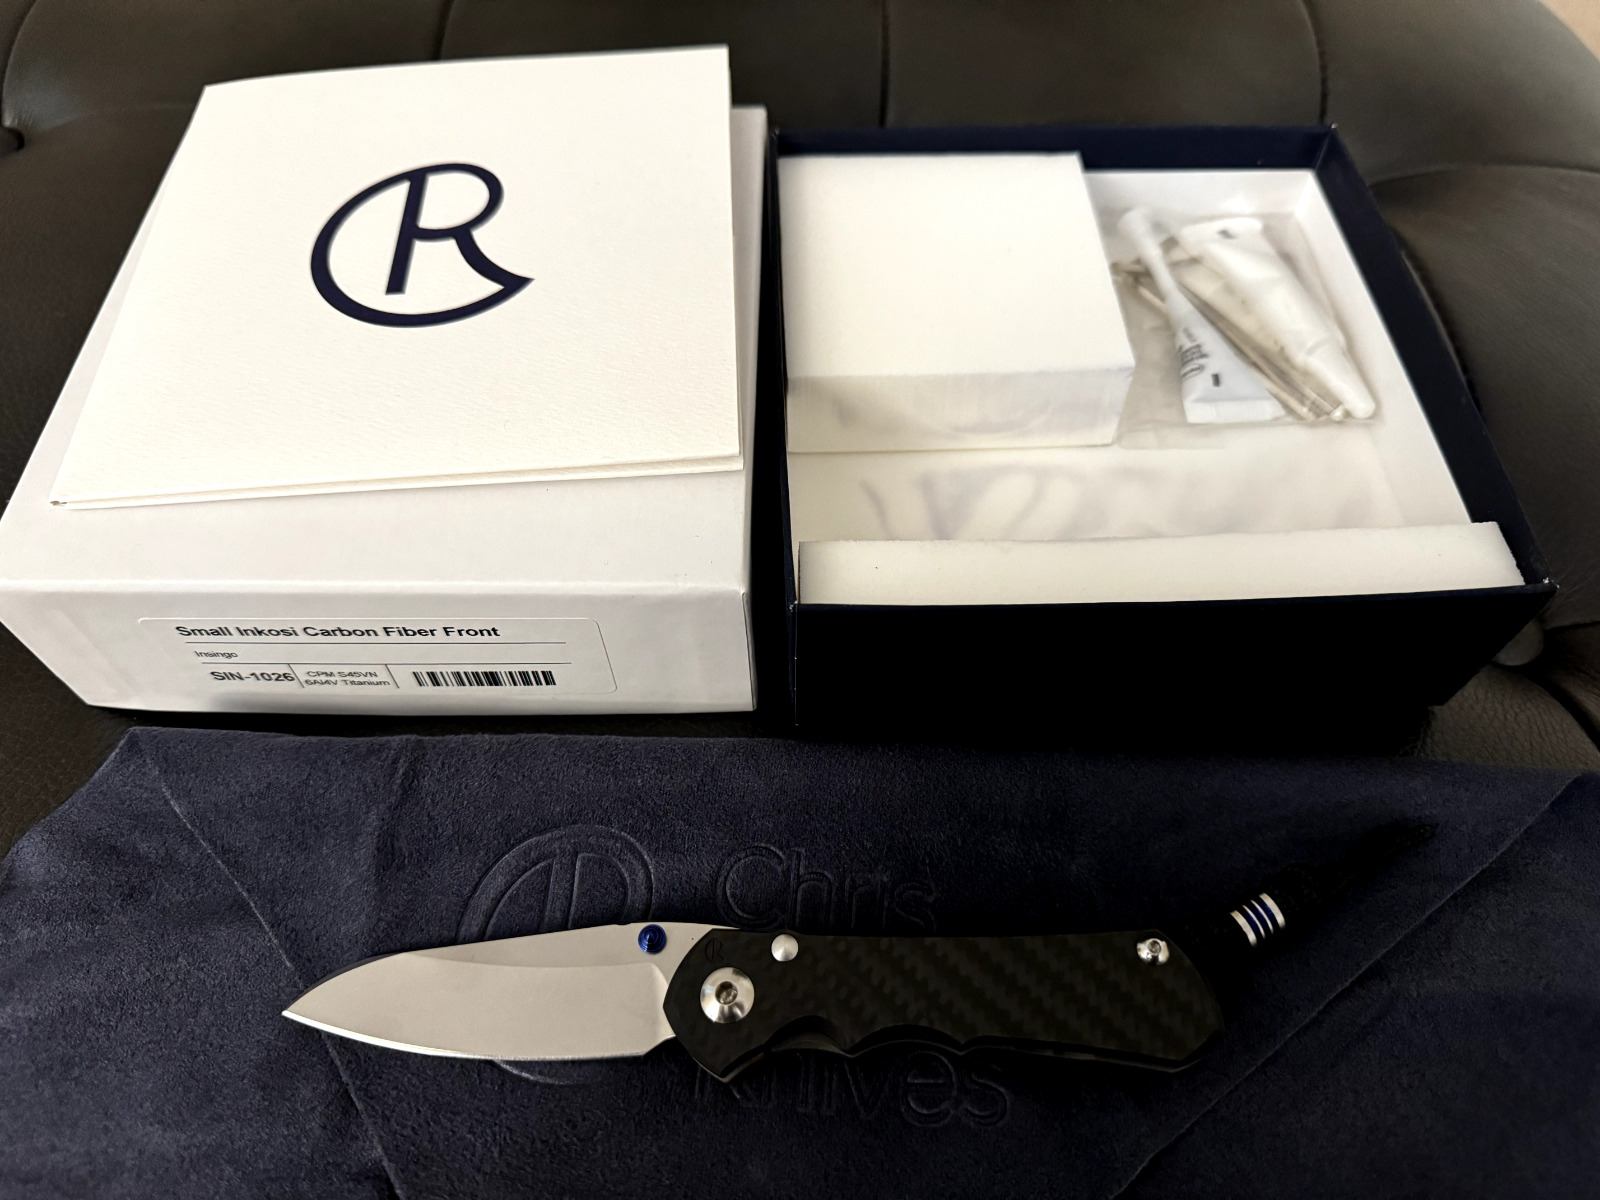 NEW Chris Reeve KnifeArt Exclusive Carbon Fiber Small Inkosi Insingo Blade S45VN